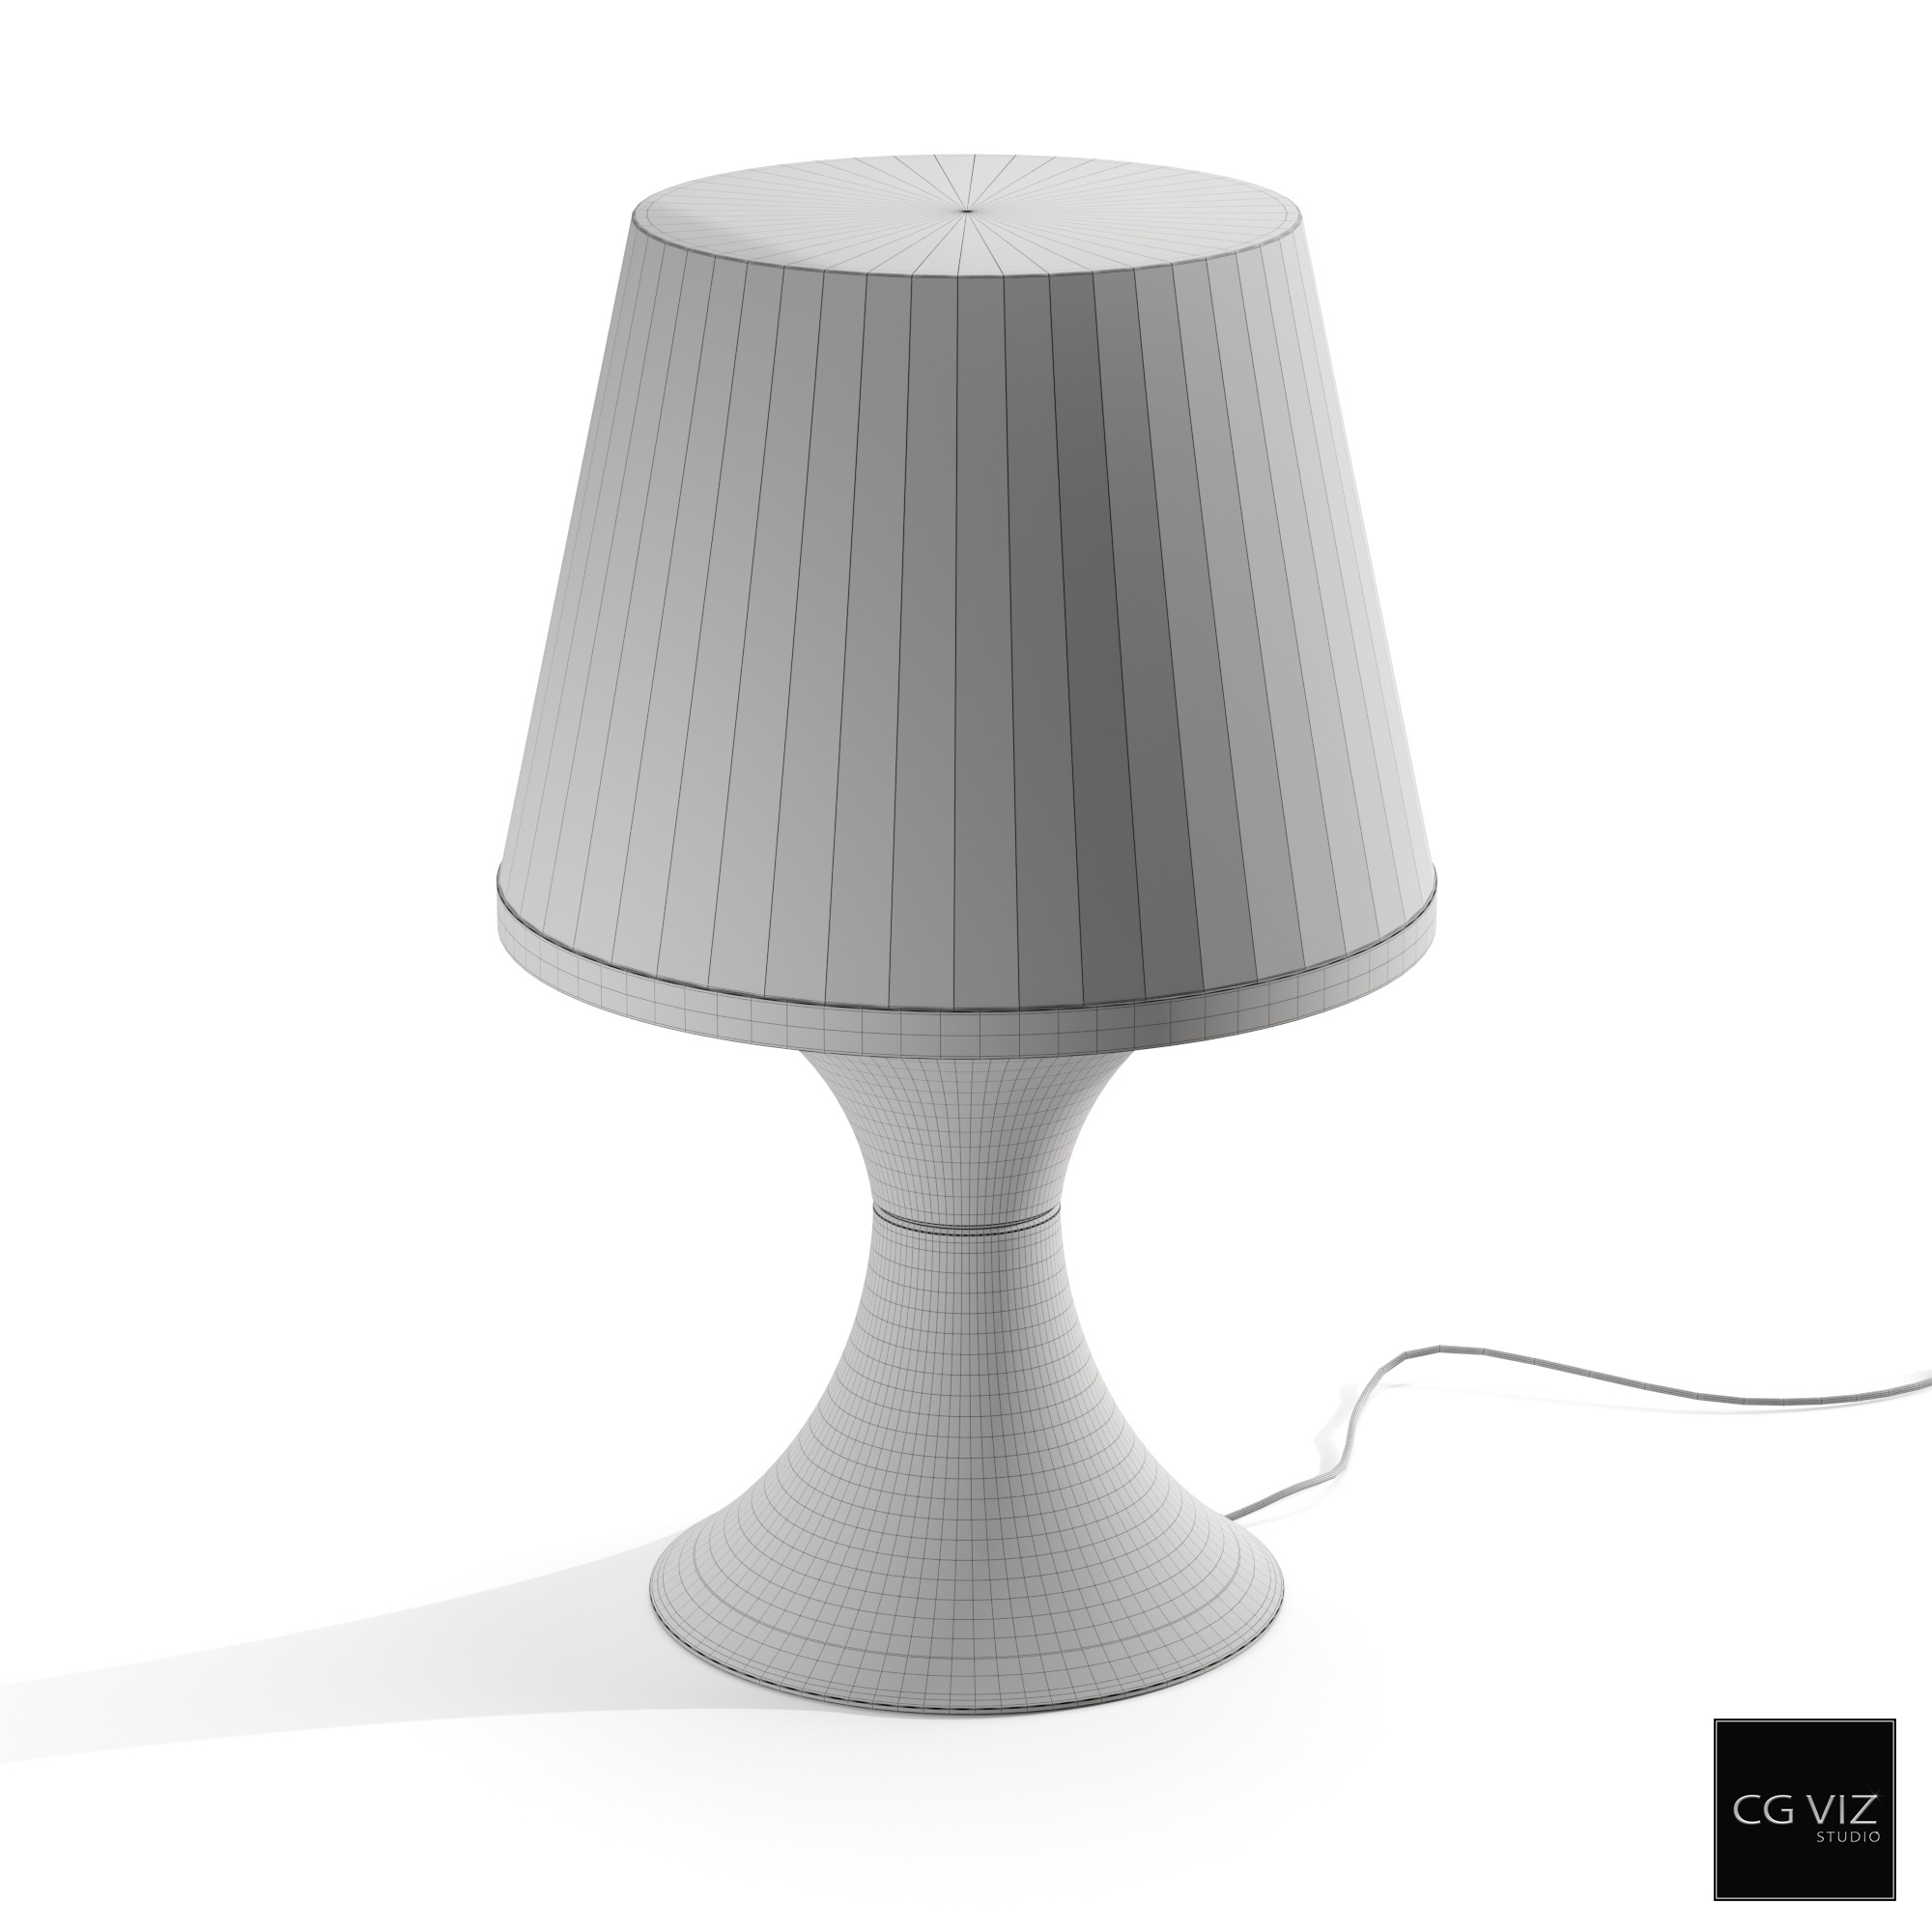 Wireframe View of Ikea Lampan Table Lamp 3D Model